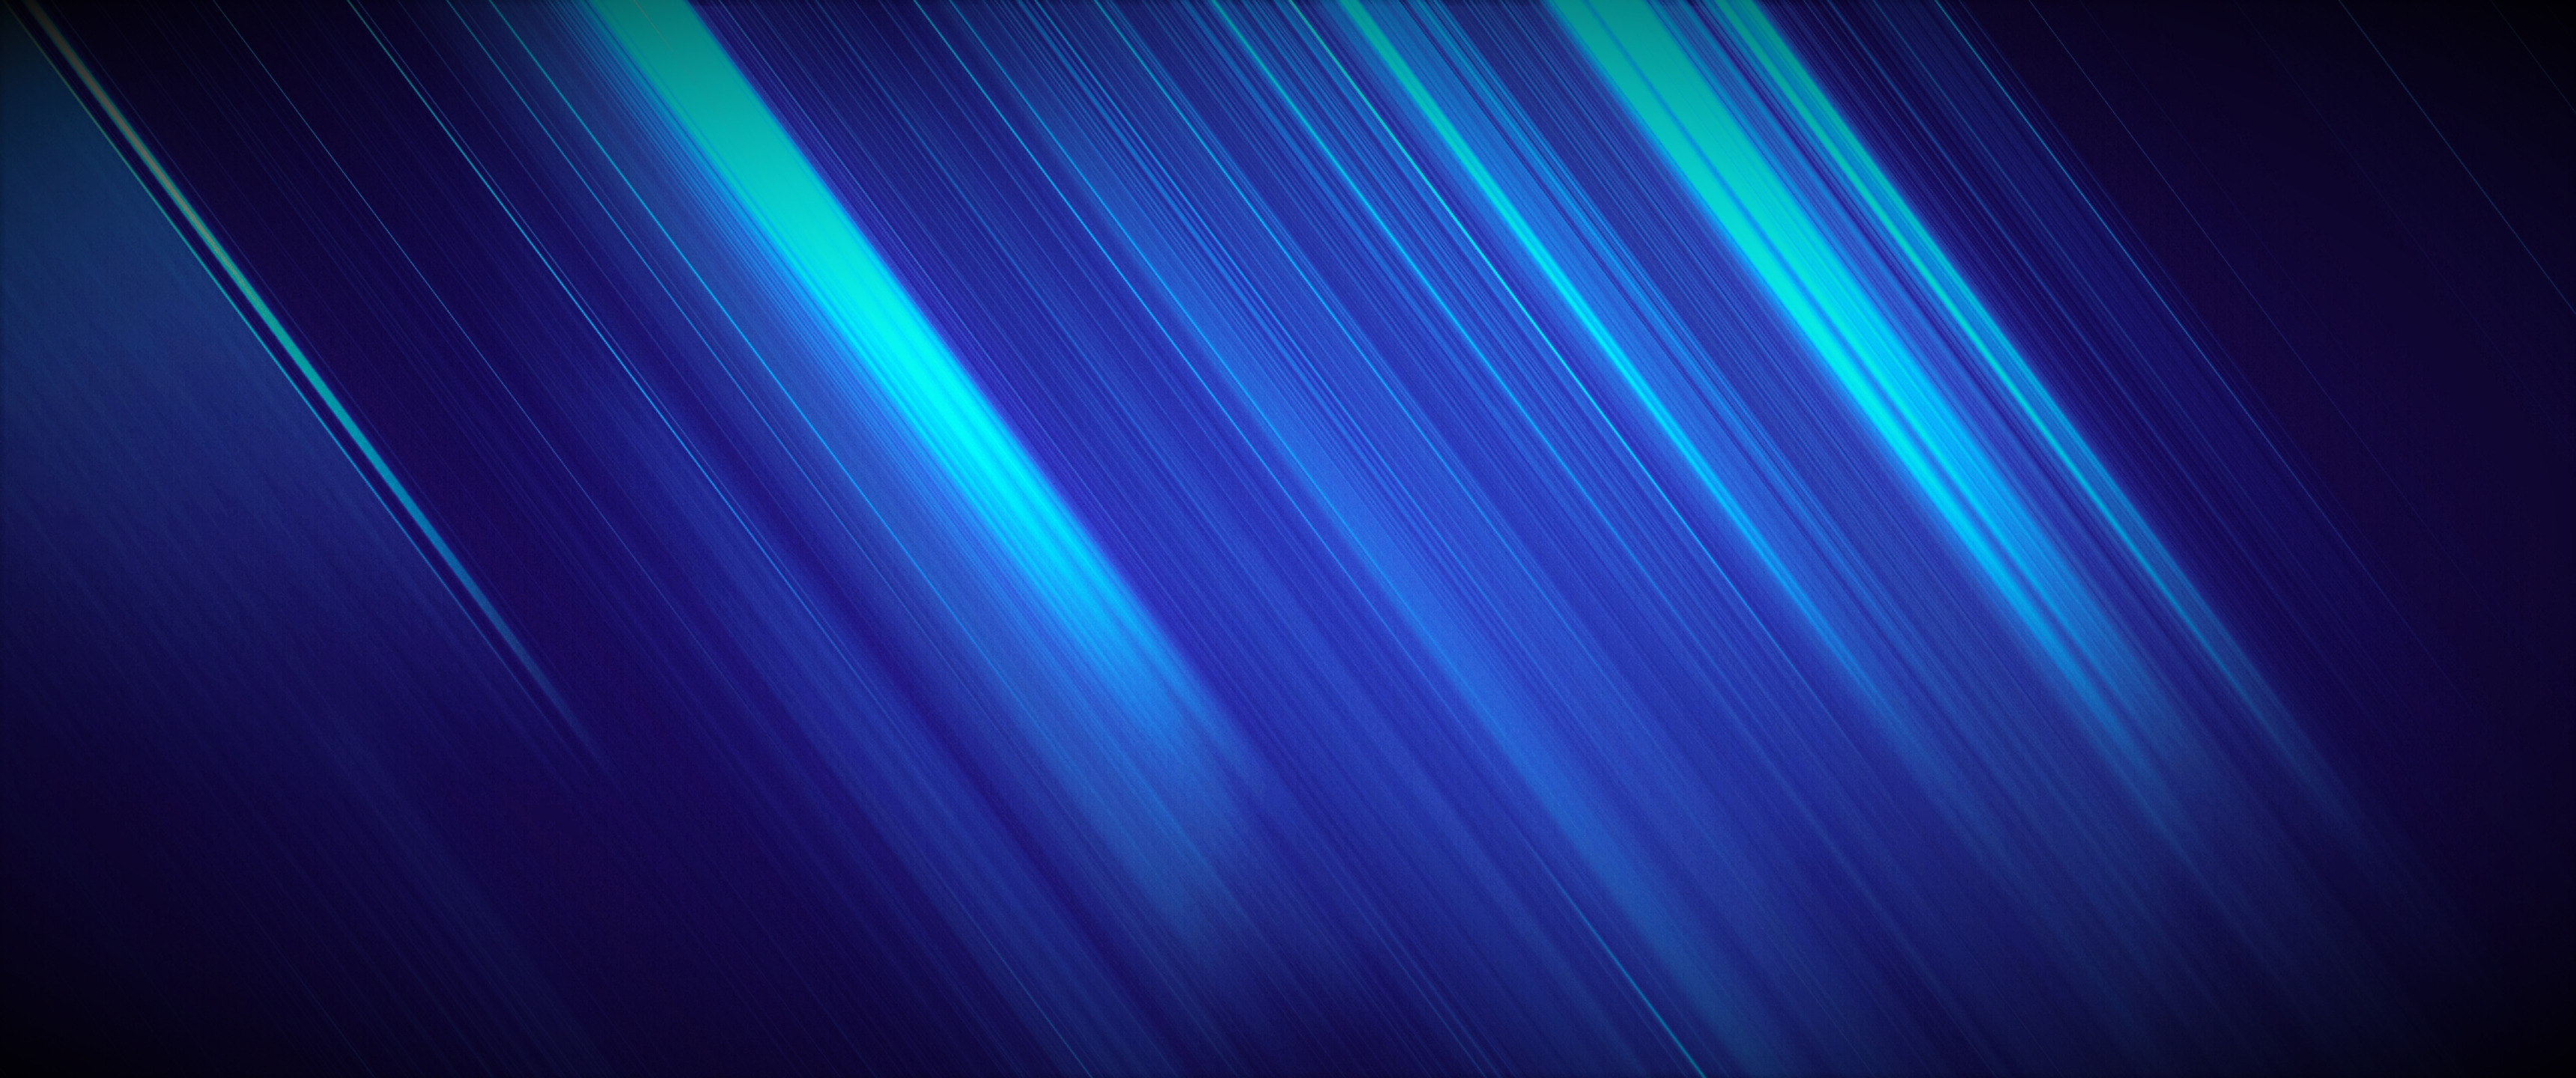 abstract, Blue, Colorful Wallpaper